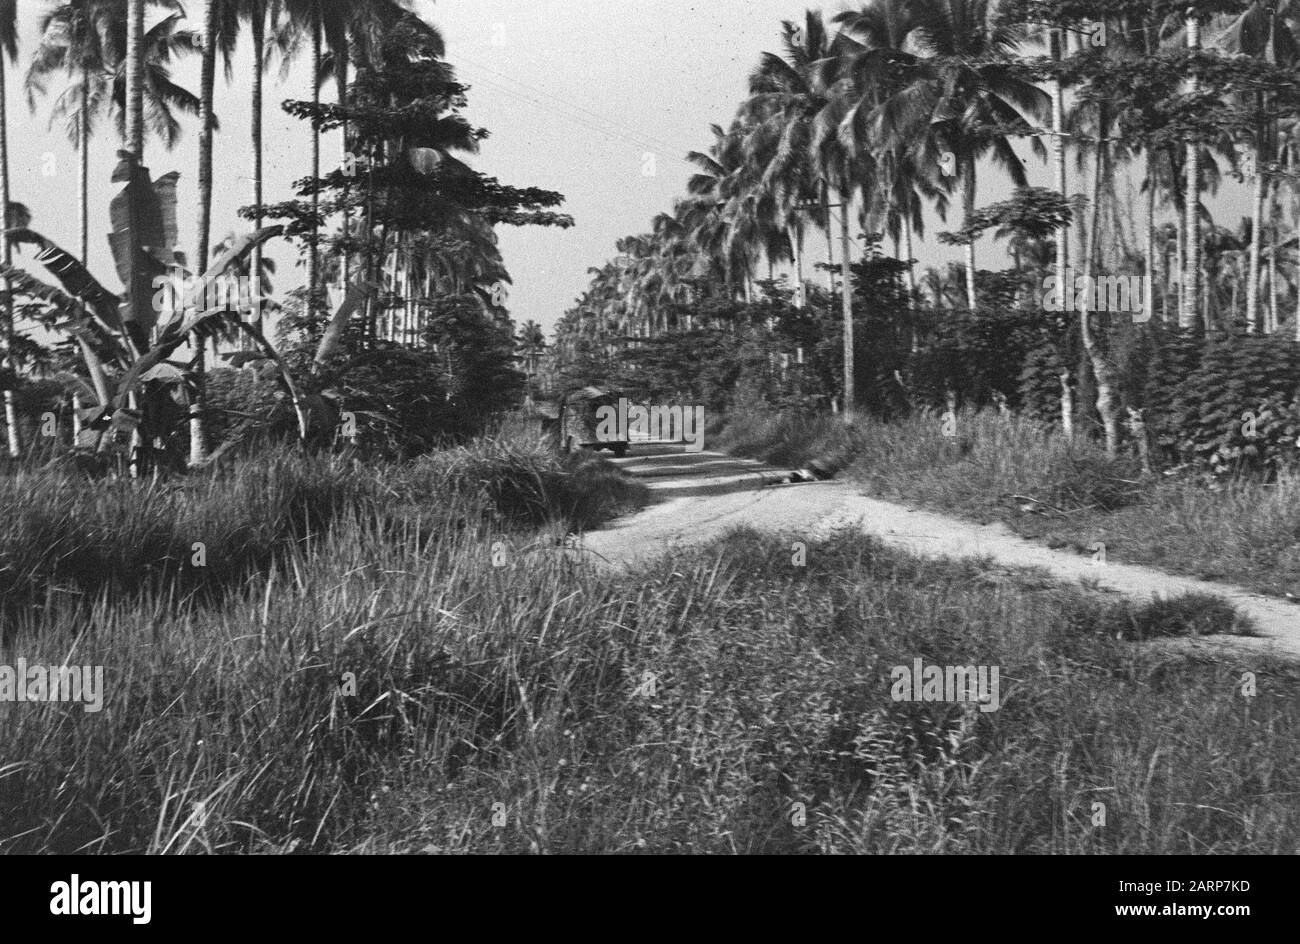 Loeboek Pakem en Baoengan  [a vehicle is in the roadside. On the right there seems to be a body] Date: 29 July 1948 Location: Indonesia, Dutch East Indies, Sumatra Stock Photo